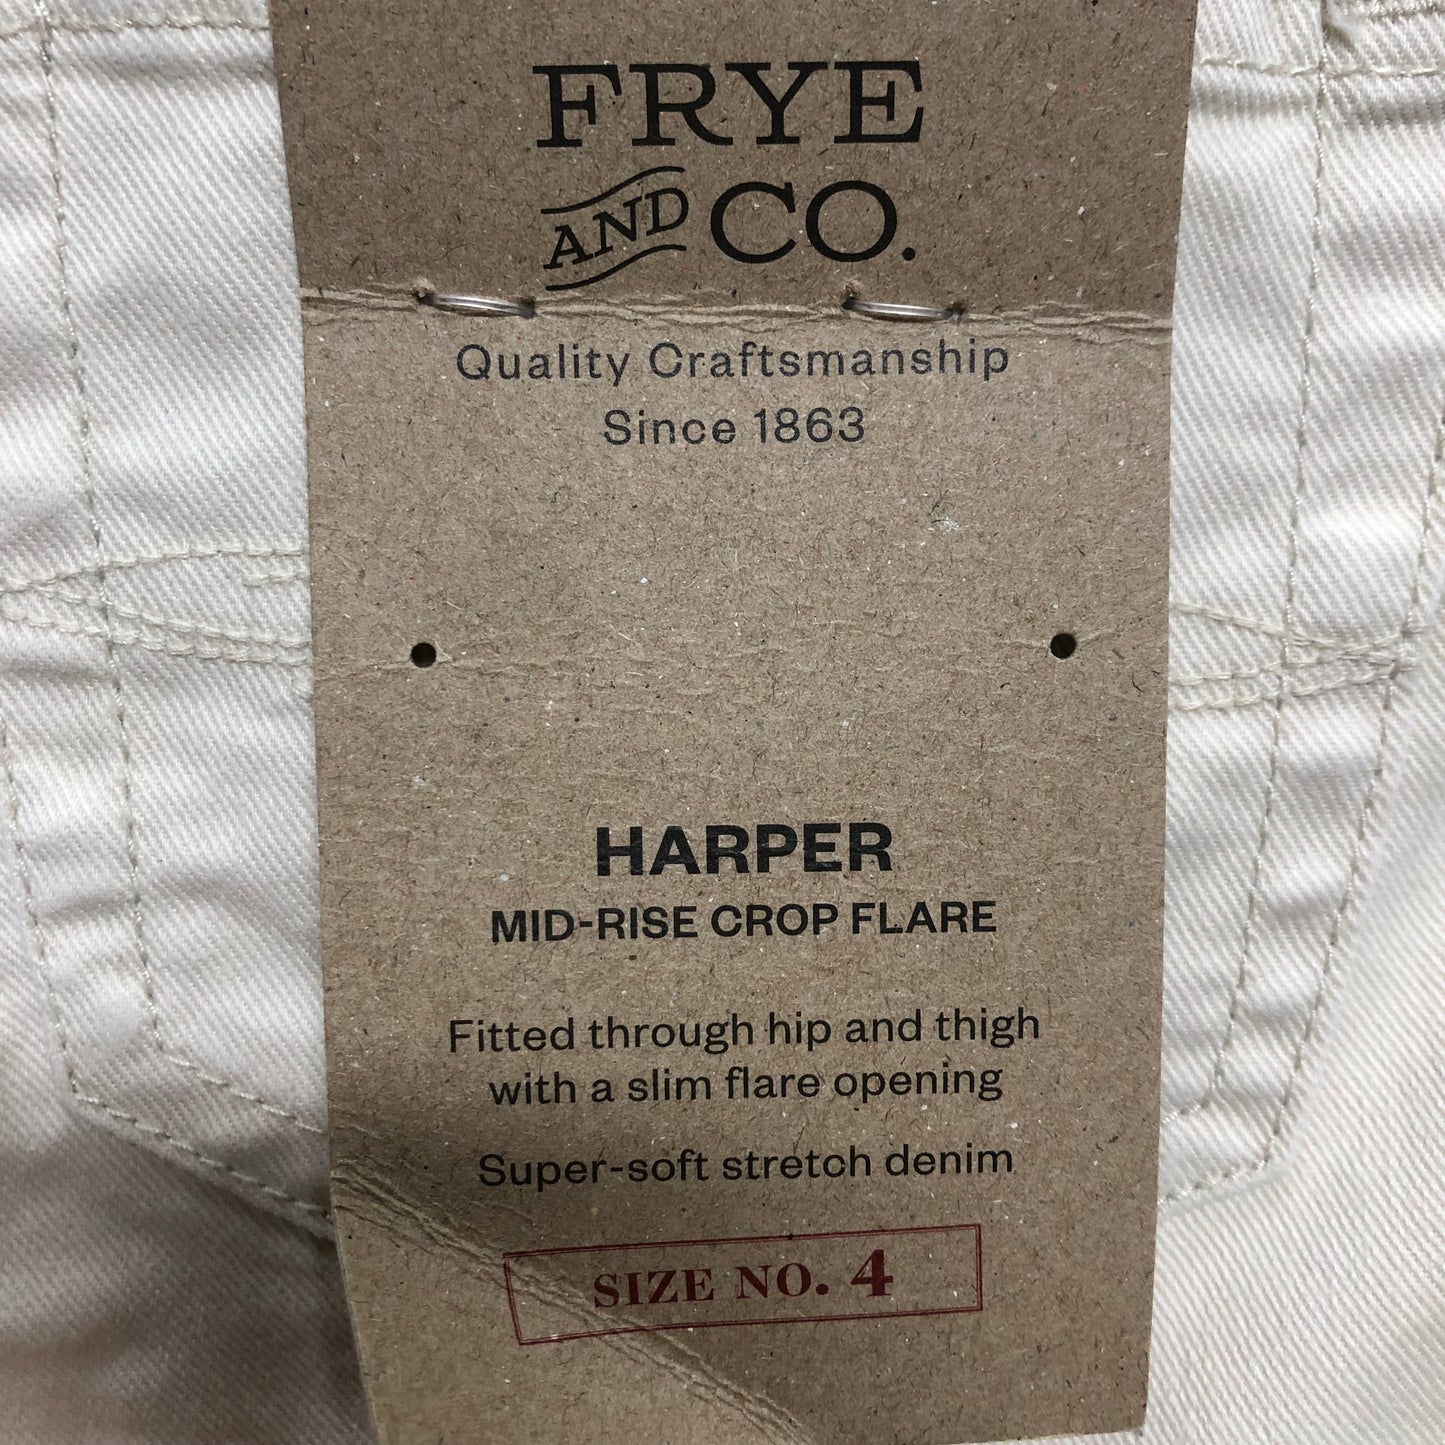 Cream Jeans Flared Frye And Co, Size 4